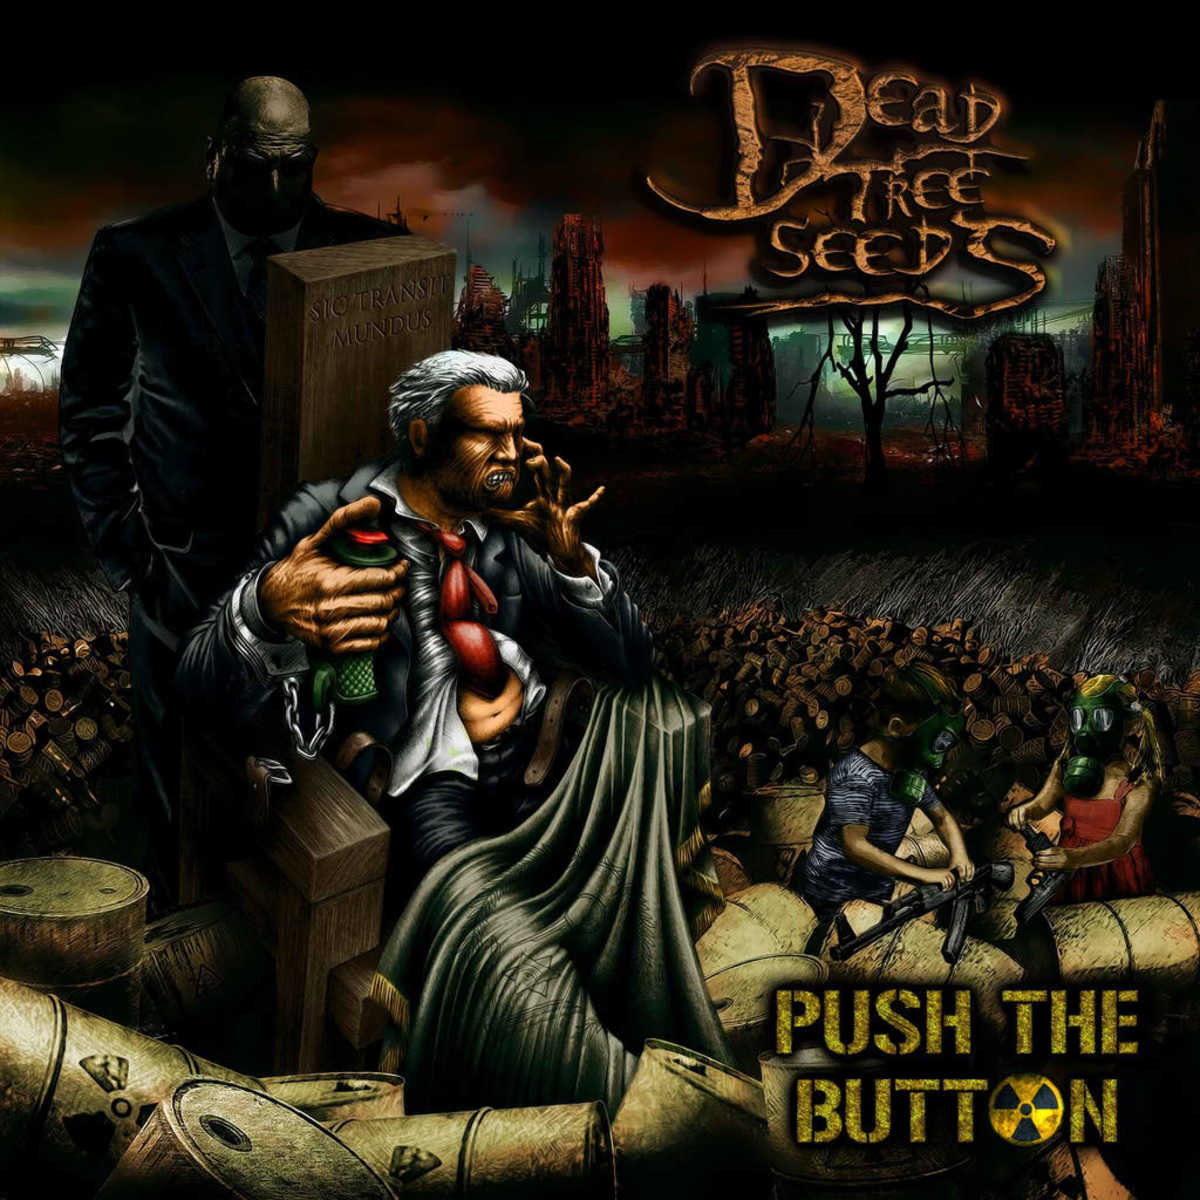 review-of-the-album-push-the-button-by-french-thrash-metal-band-dead-tree-seeds